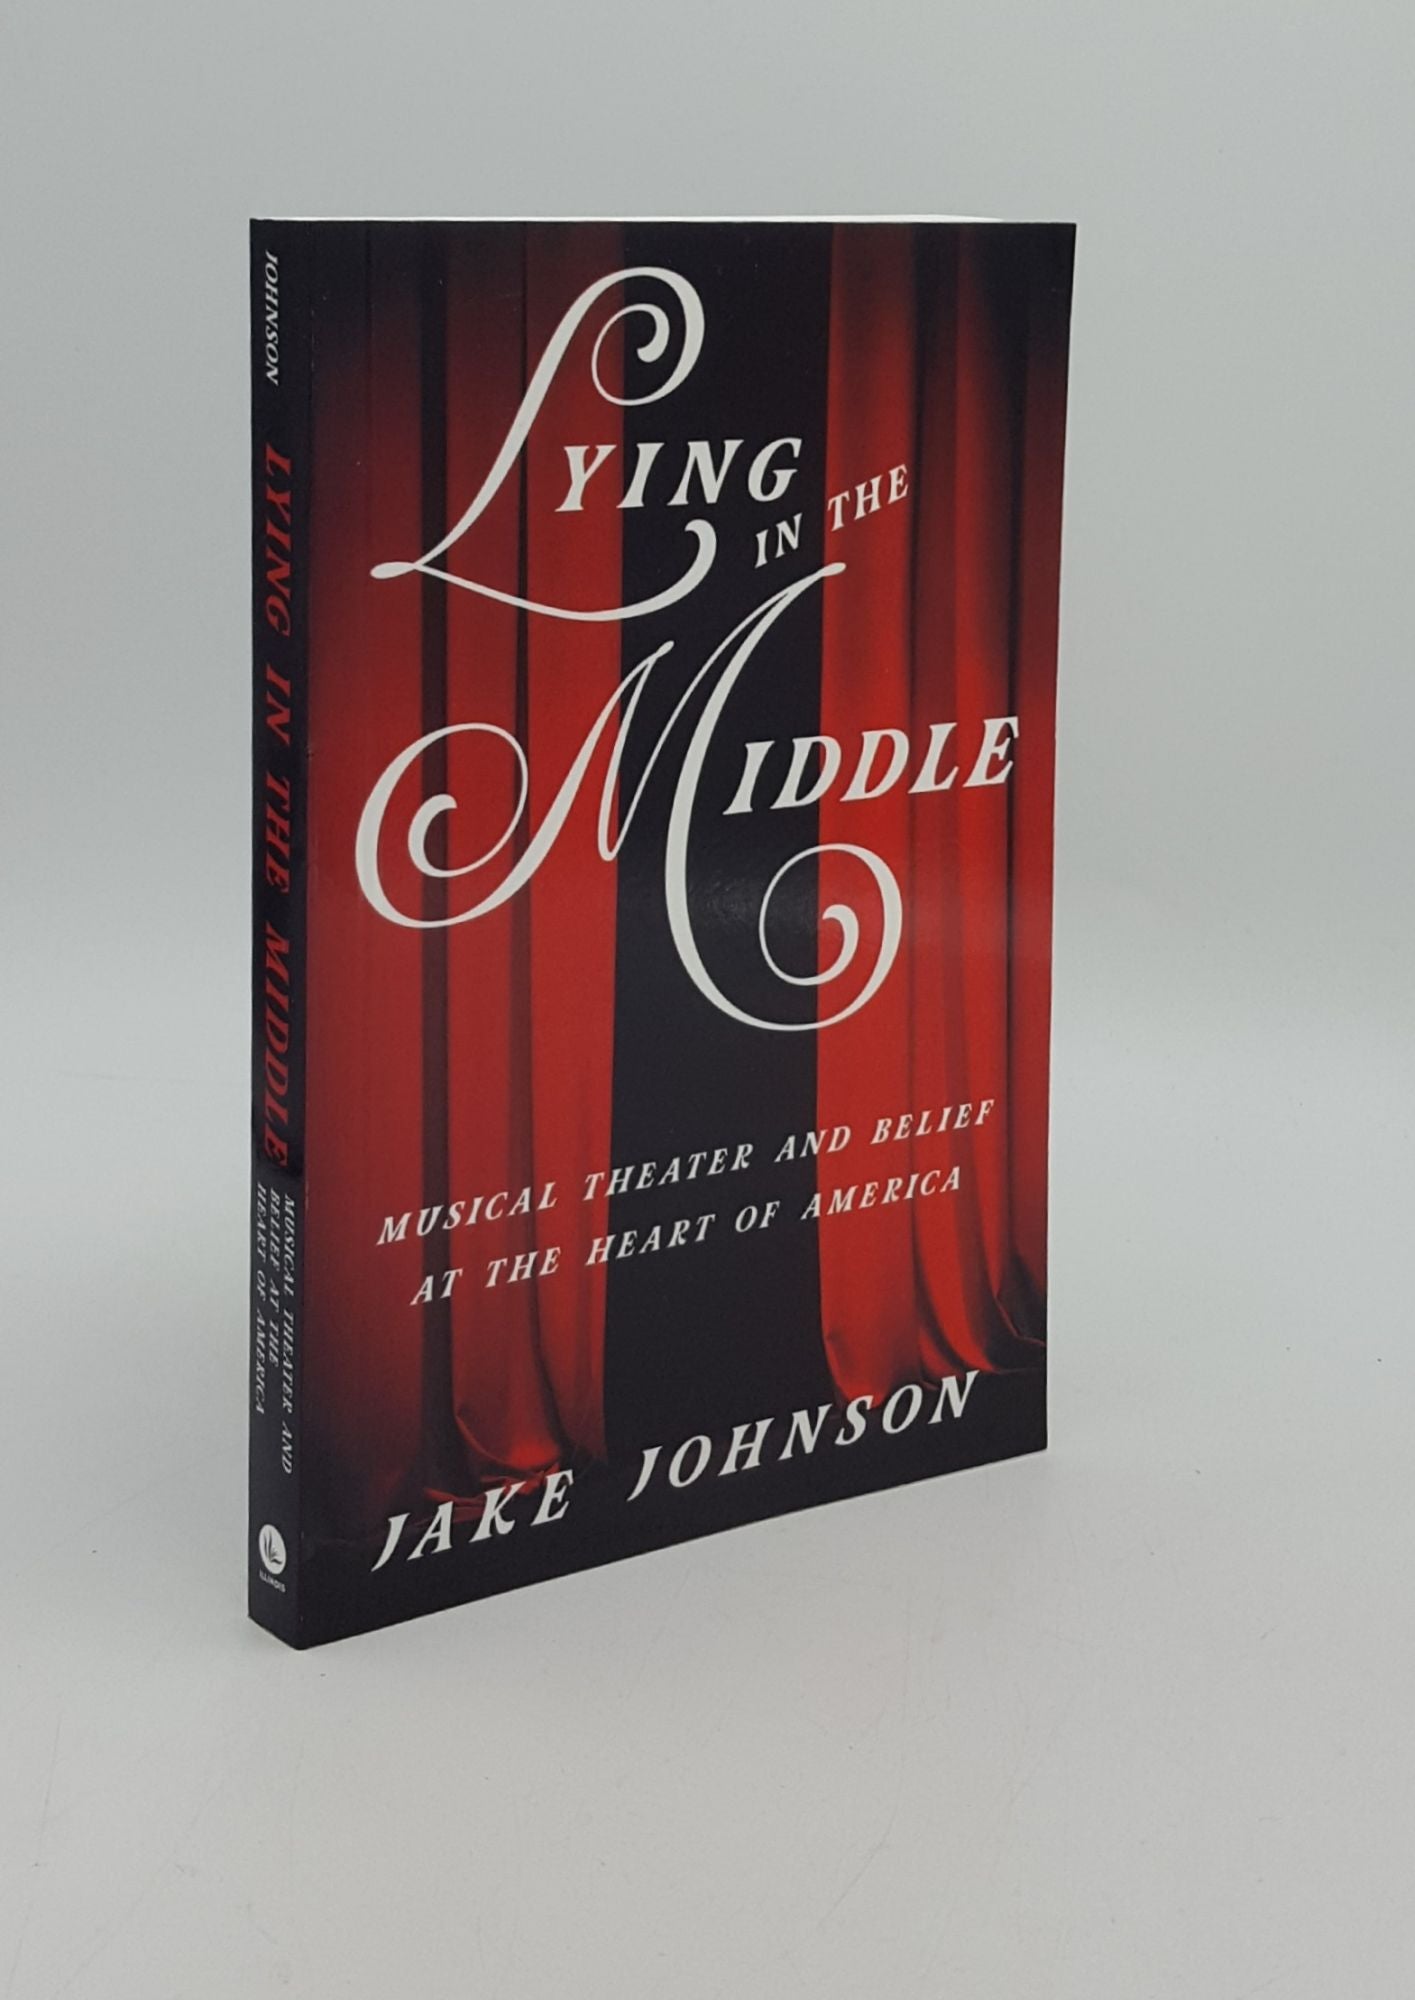 JOHNSON Jake - Lying in the Middle Musical Theater and Belief at the Heart of America